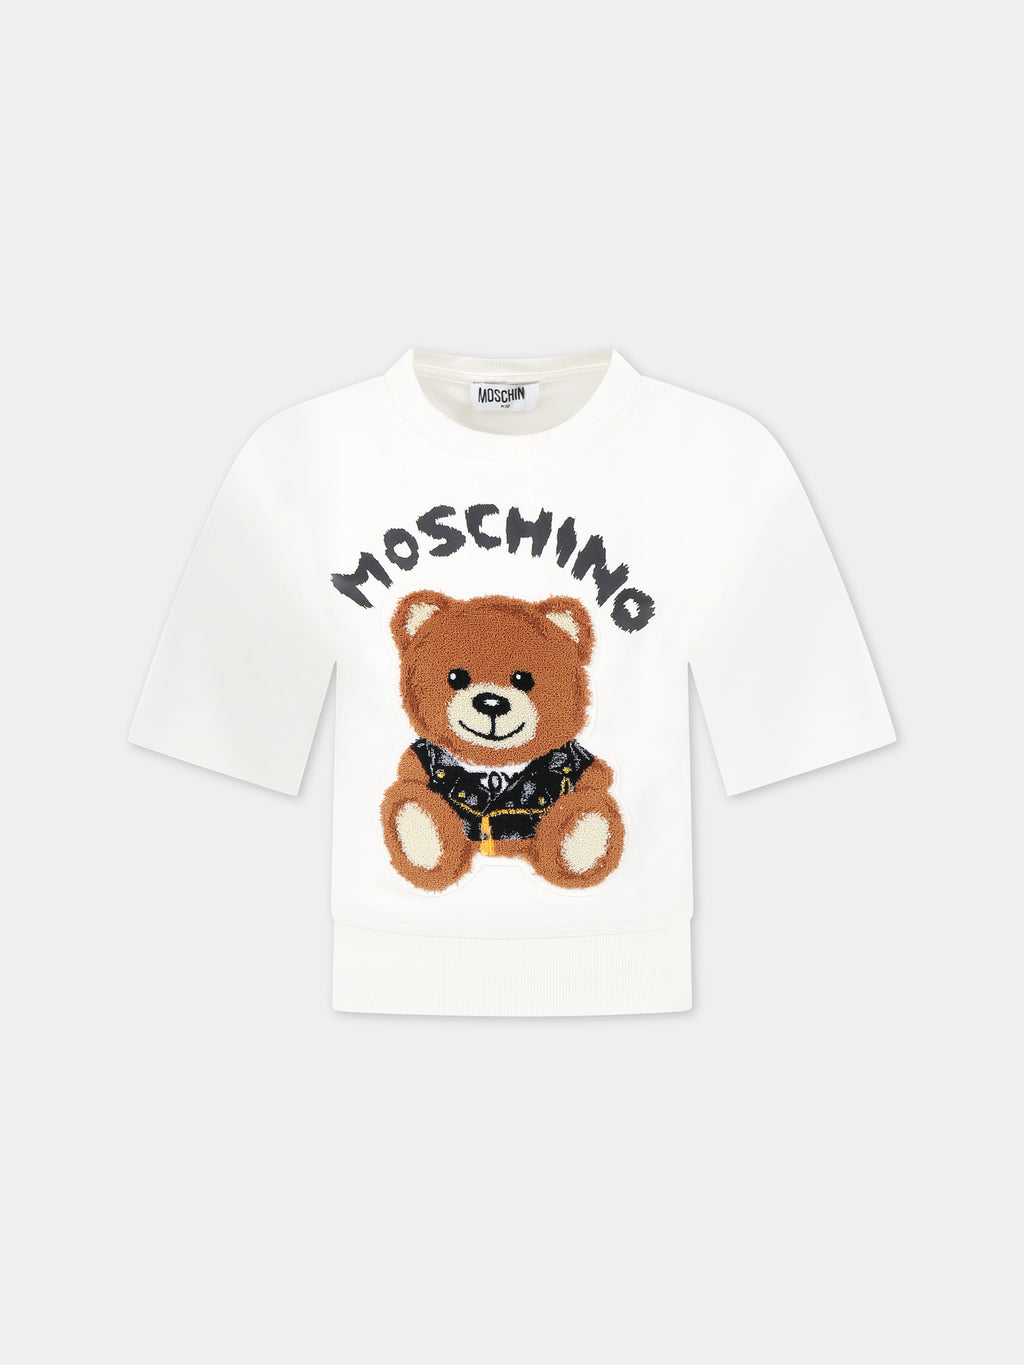 White sweatshirt for kids with Teddy bear and logo